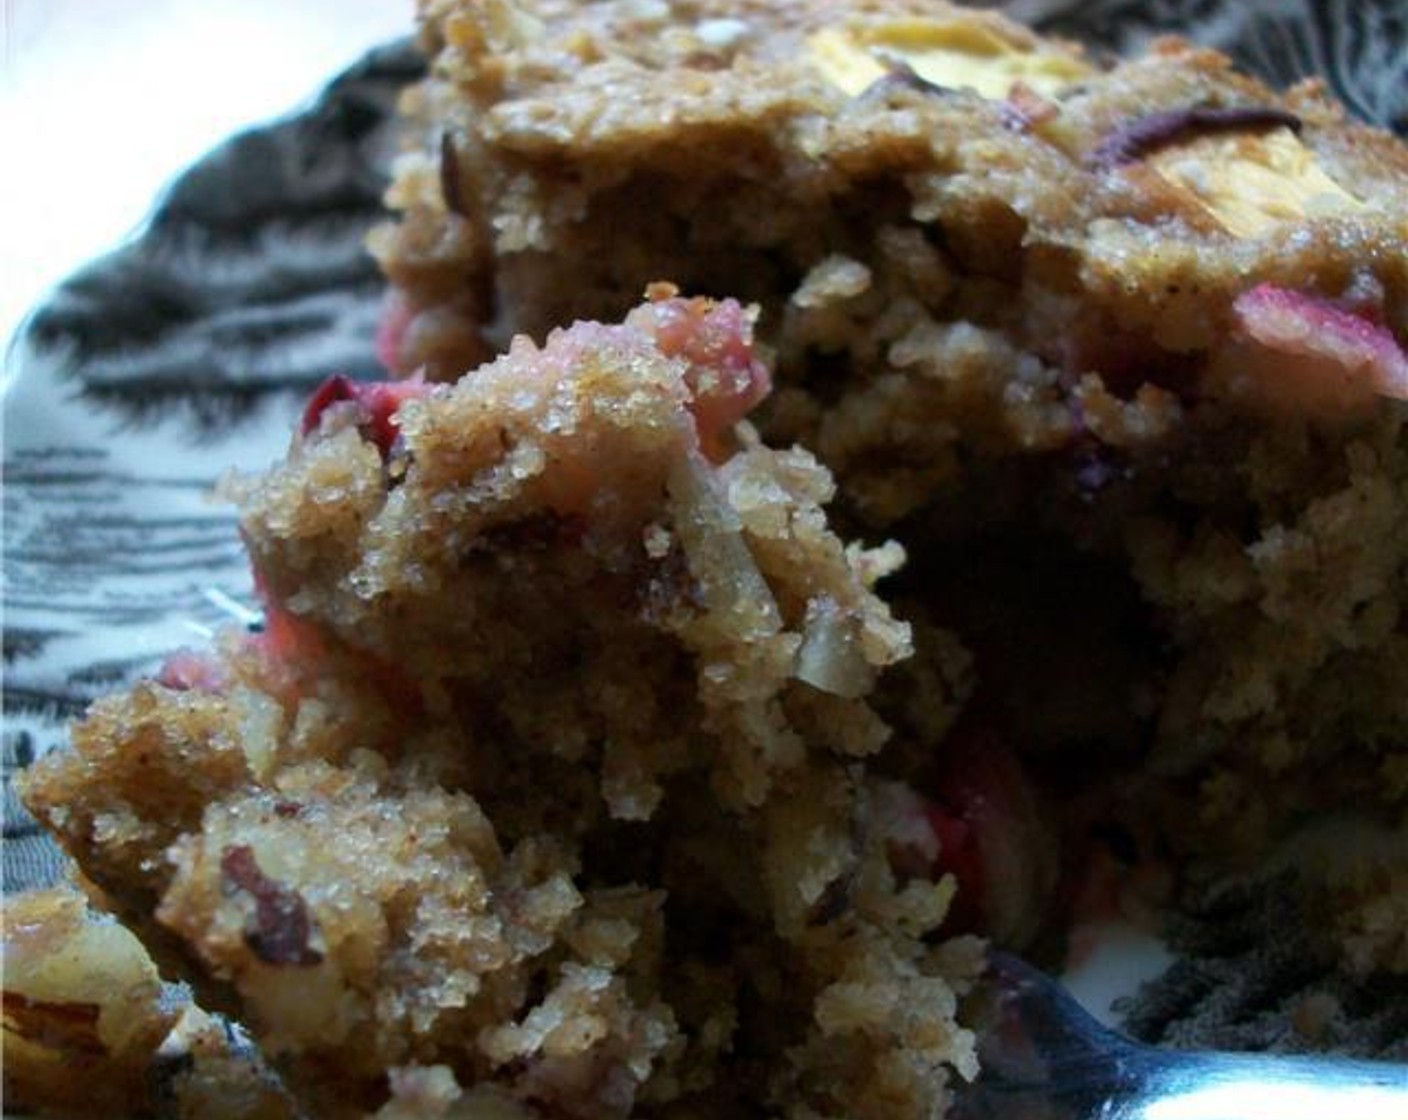 Almond Oat Cake with Peaches and Plums